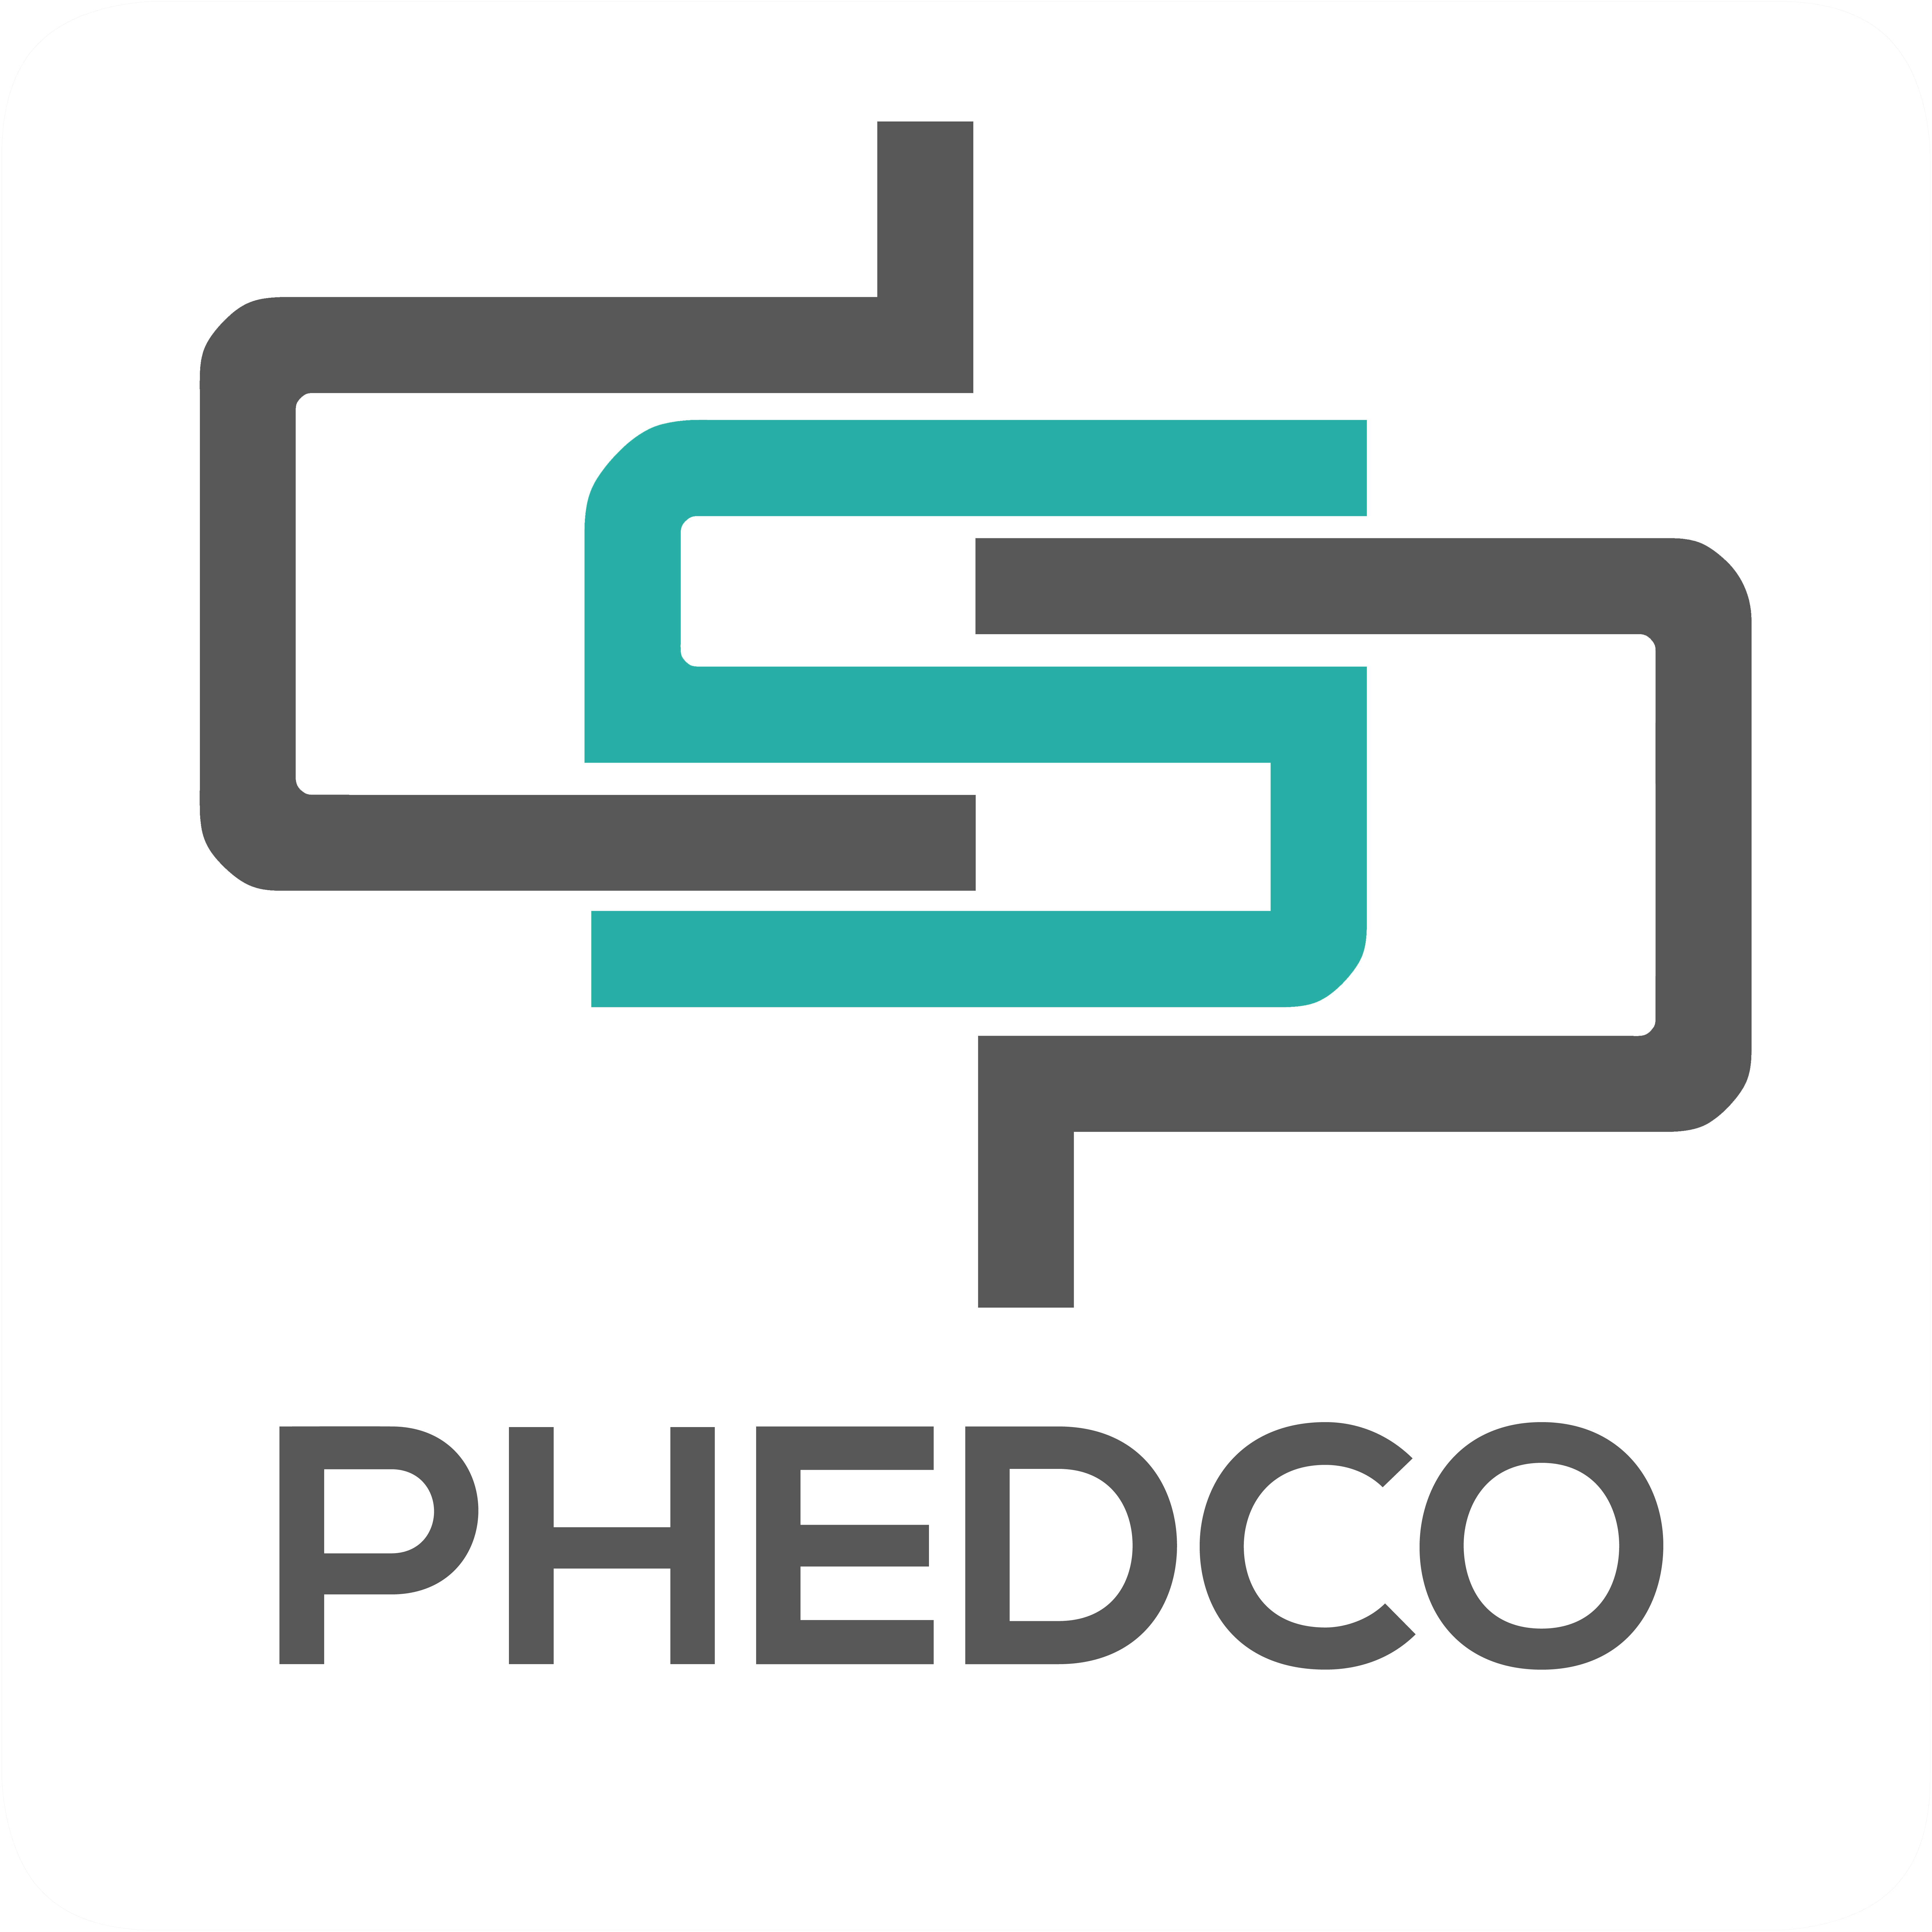 PHEDCO